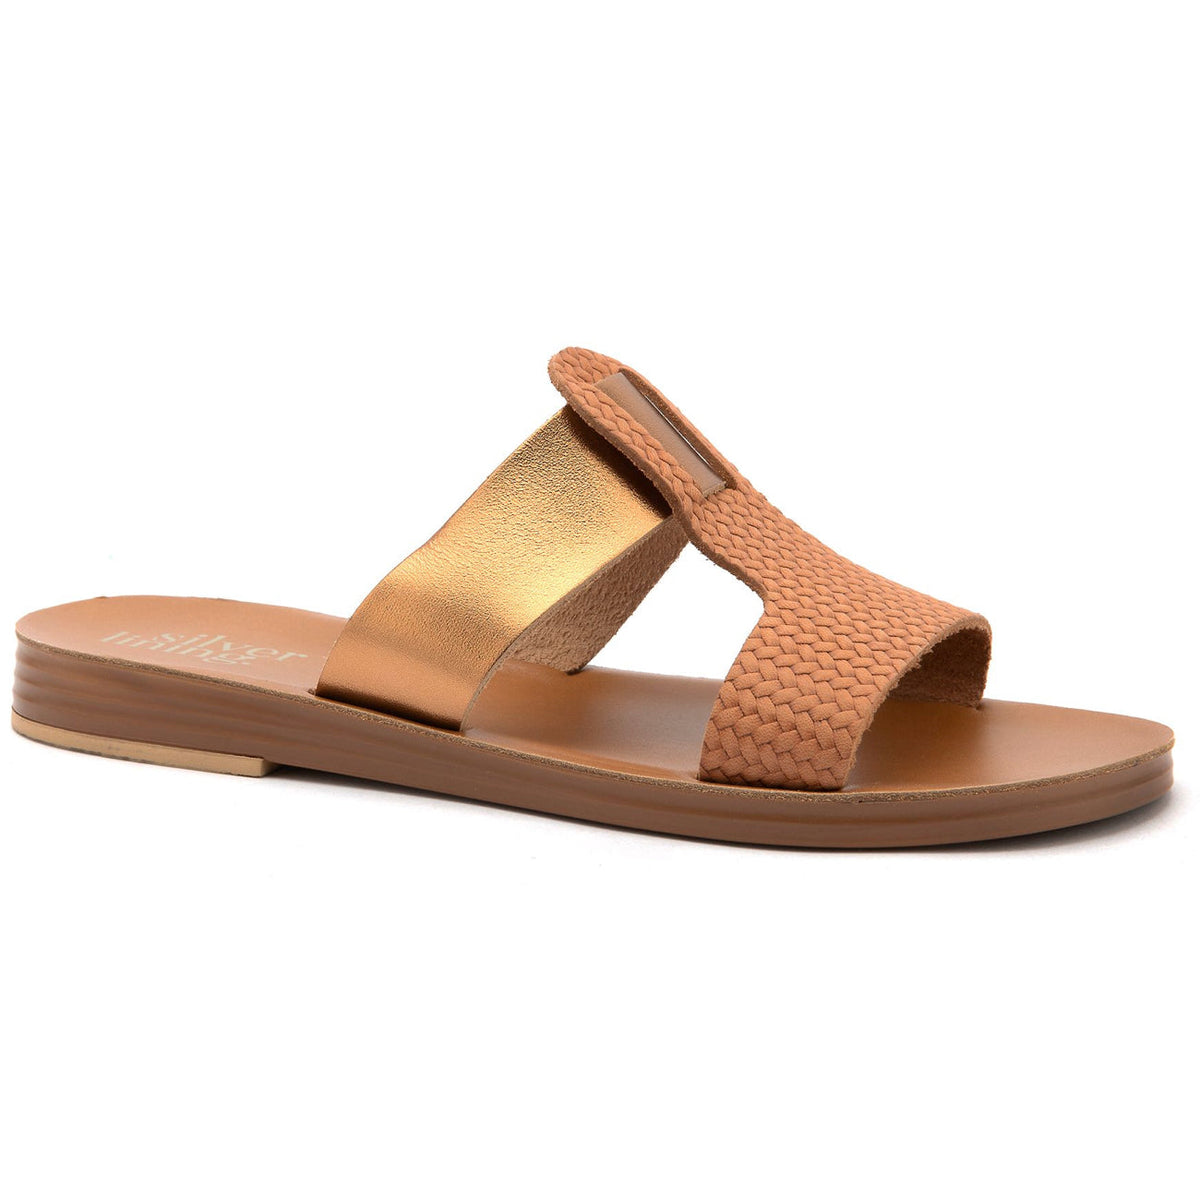 Silver Lining, Gala 2507, Leather, Sandal, Tabac Sandals Silver Lining 